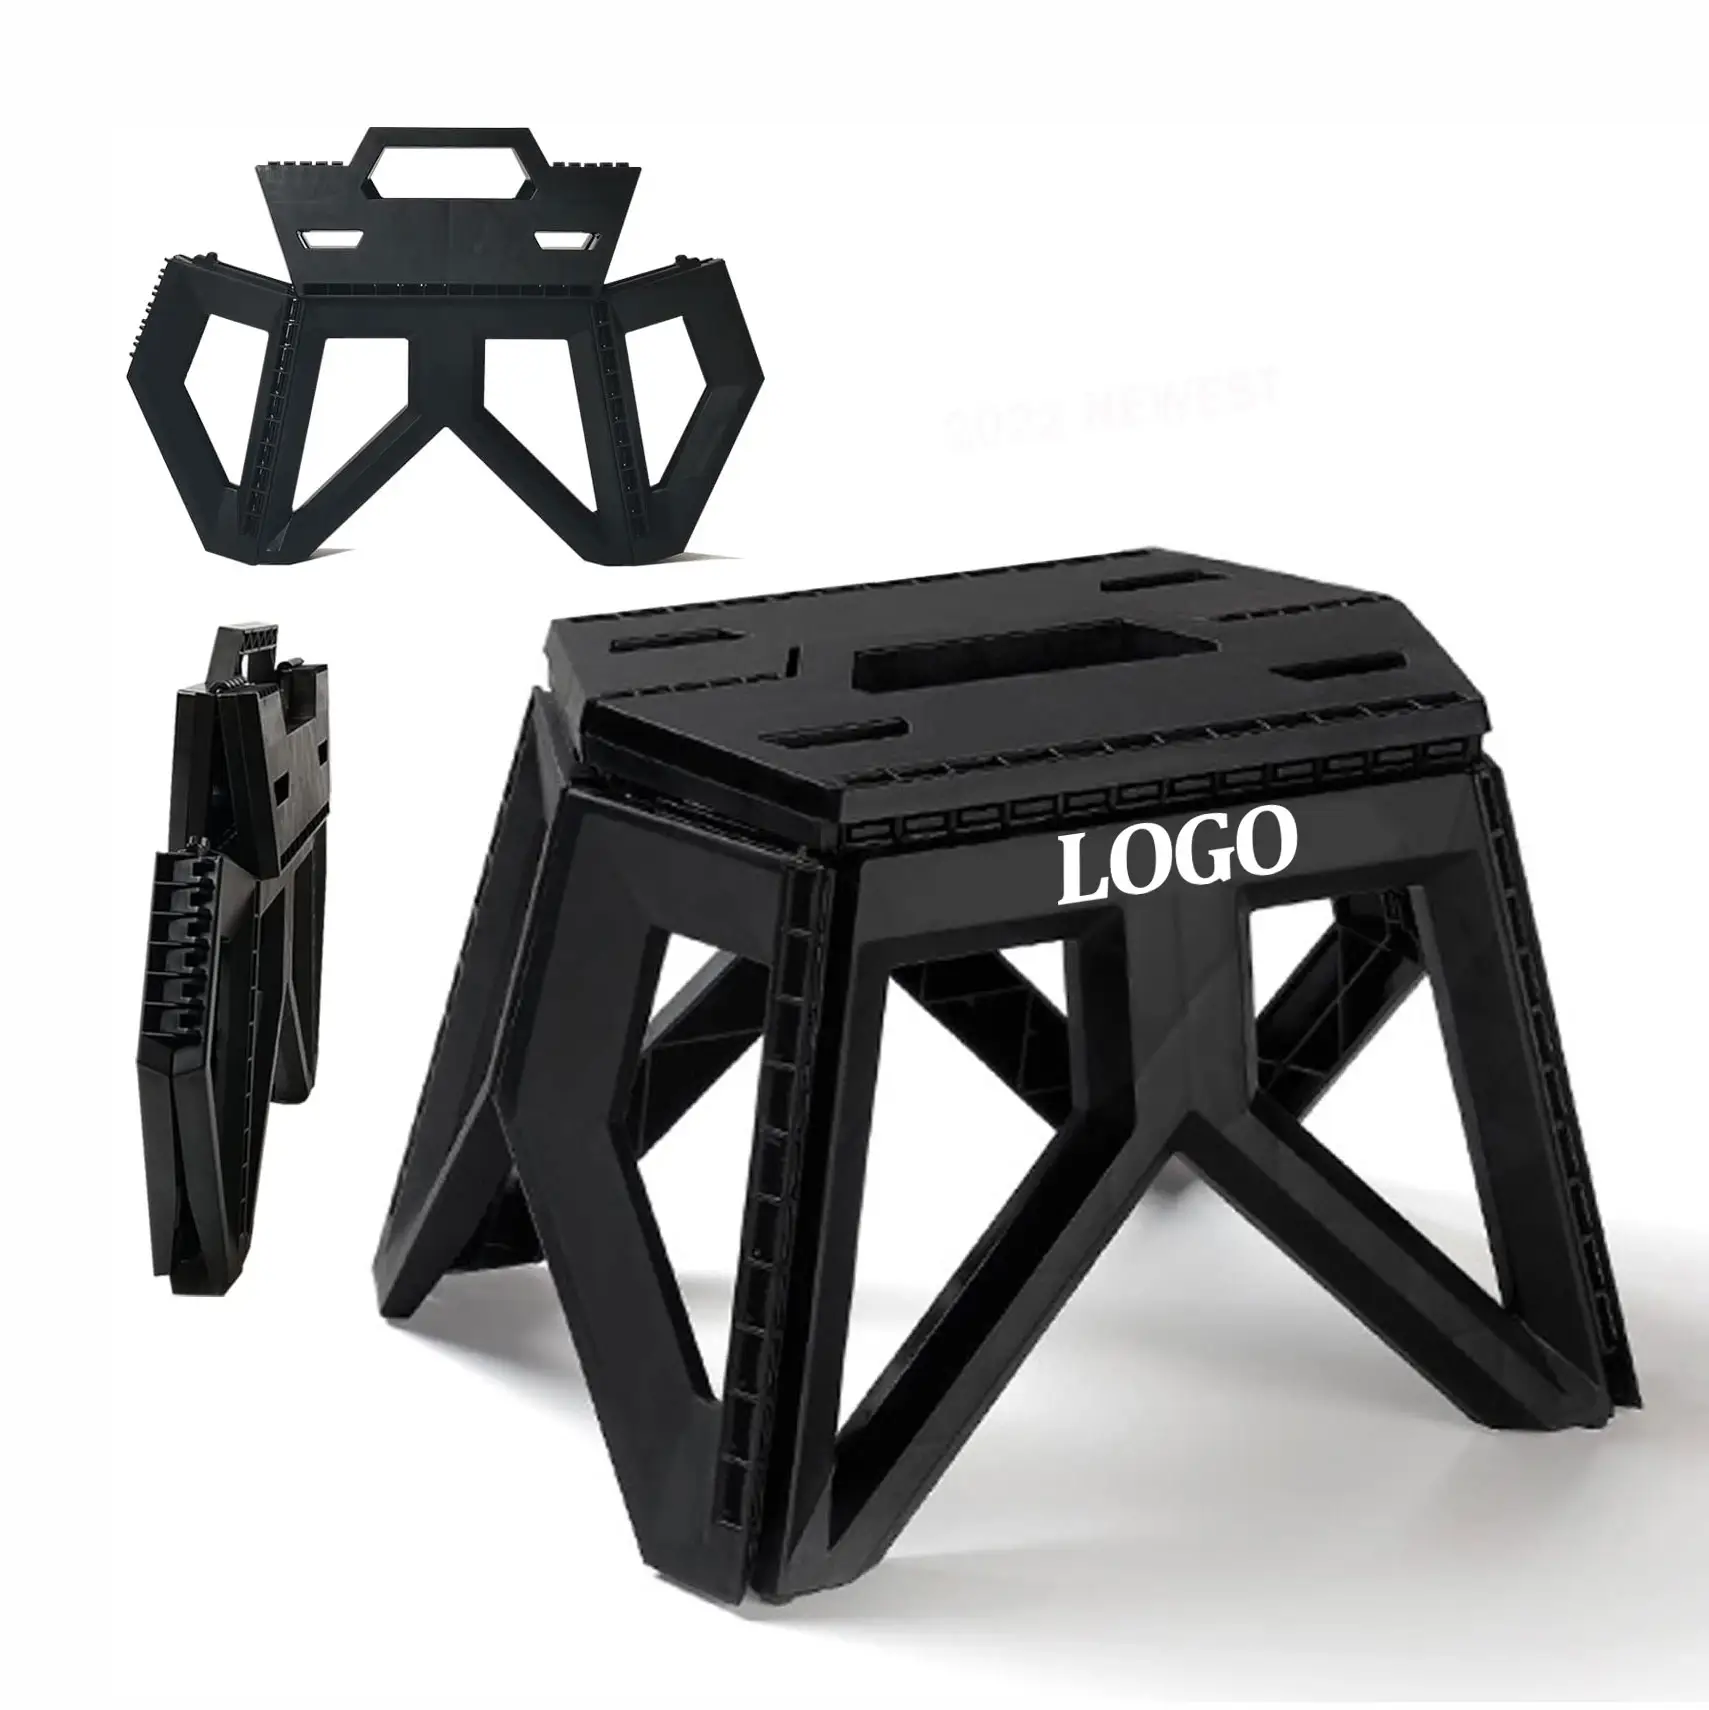 Premium Heavy Duty Folding Collapsible Camping Step Stool Plastic Portable Chairs for Fishing Hiking Outdoor Gardening